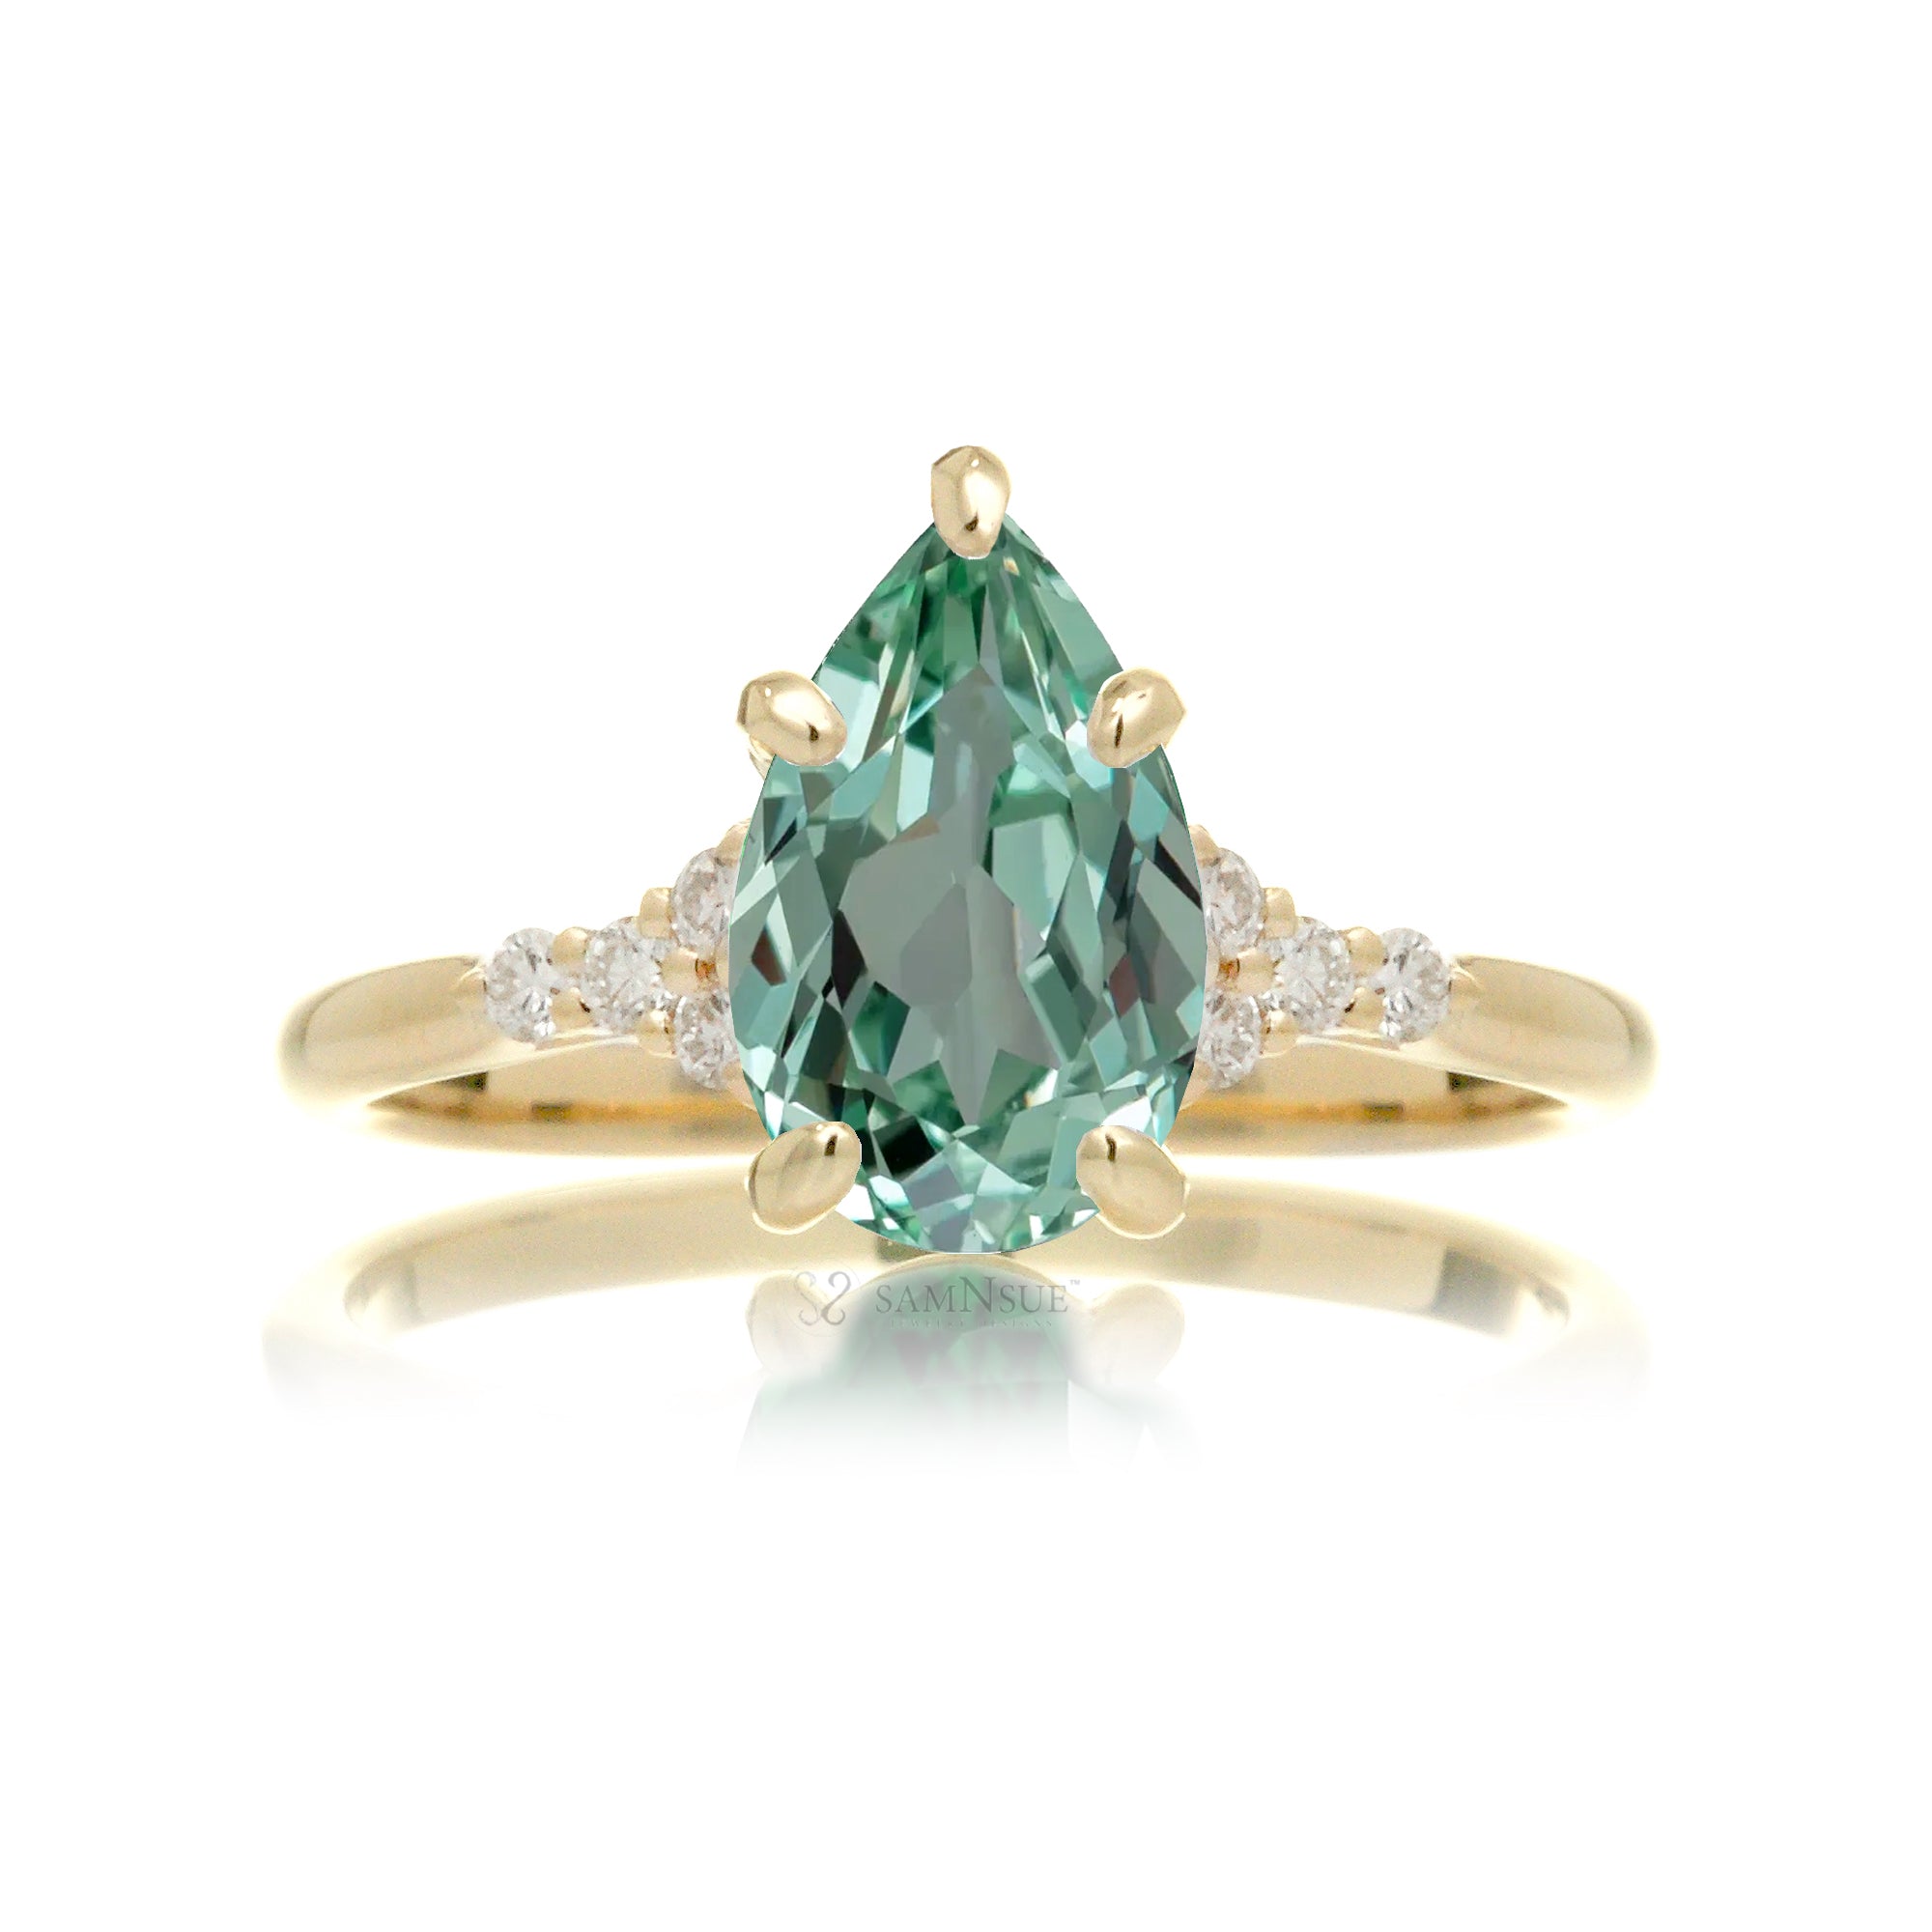 Pear cut green sapphire and diamond engagement ring in yellow gold - the Chloe lab-grown